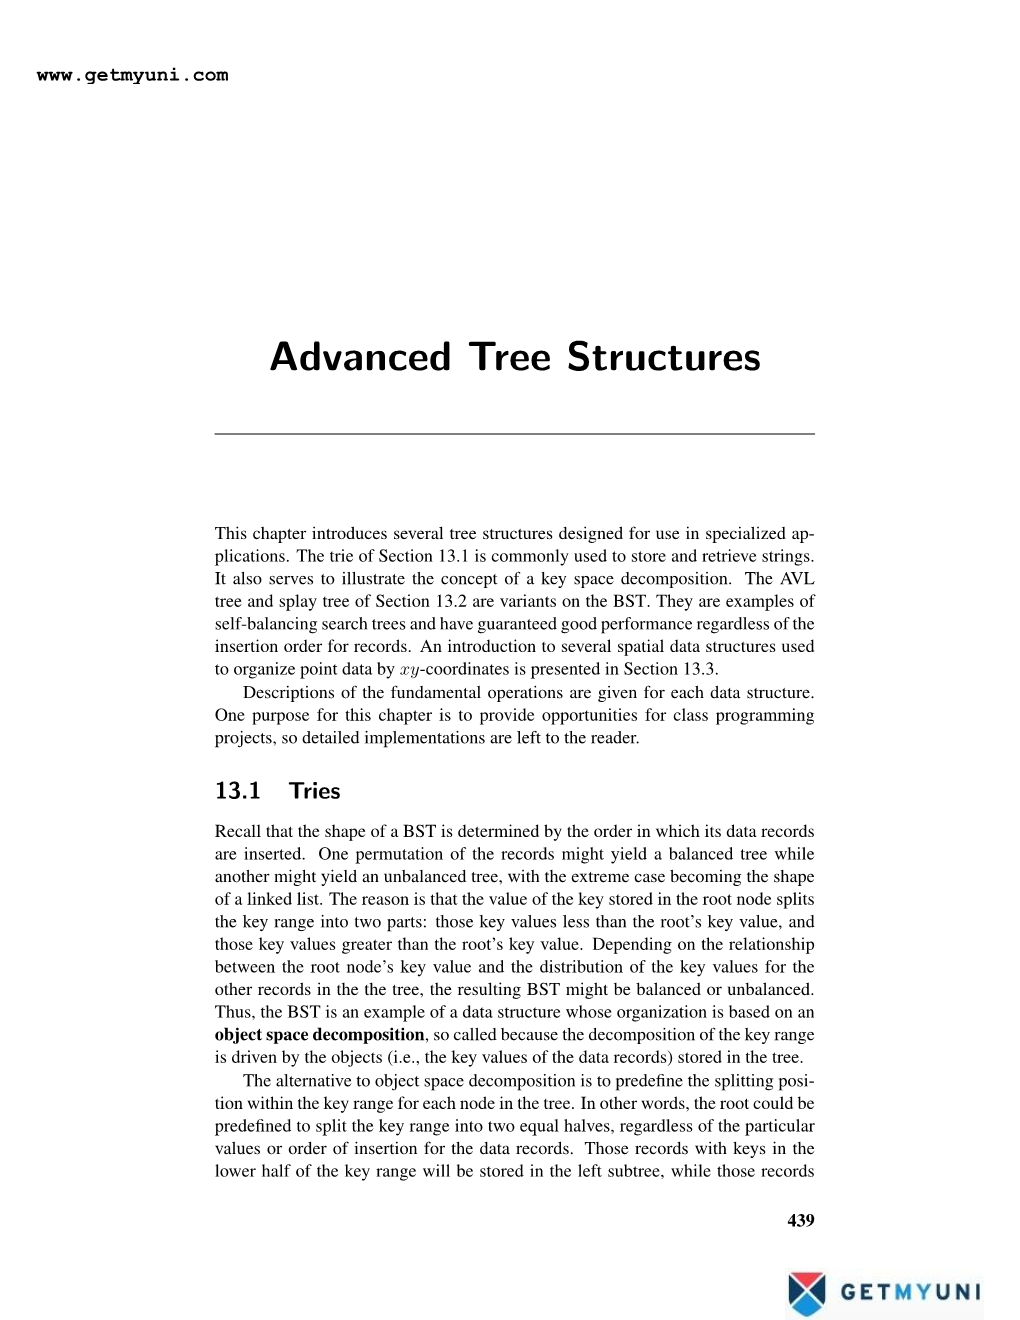 Advanced Tree Structures